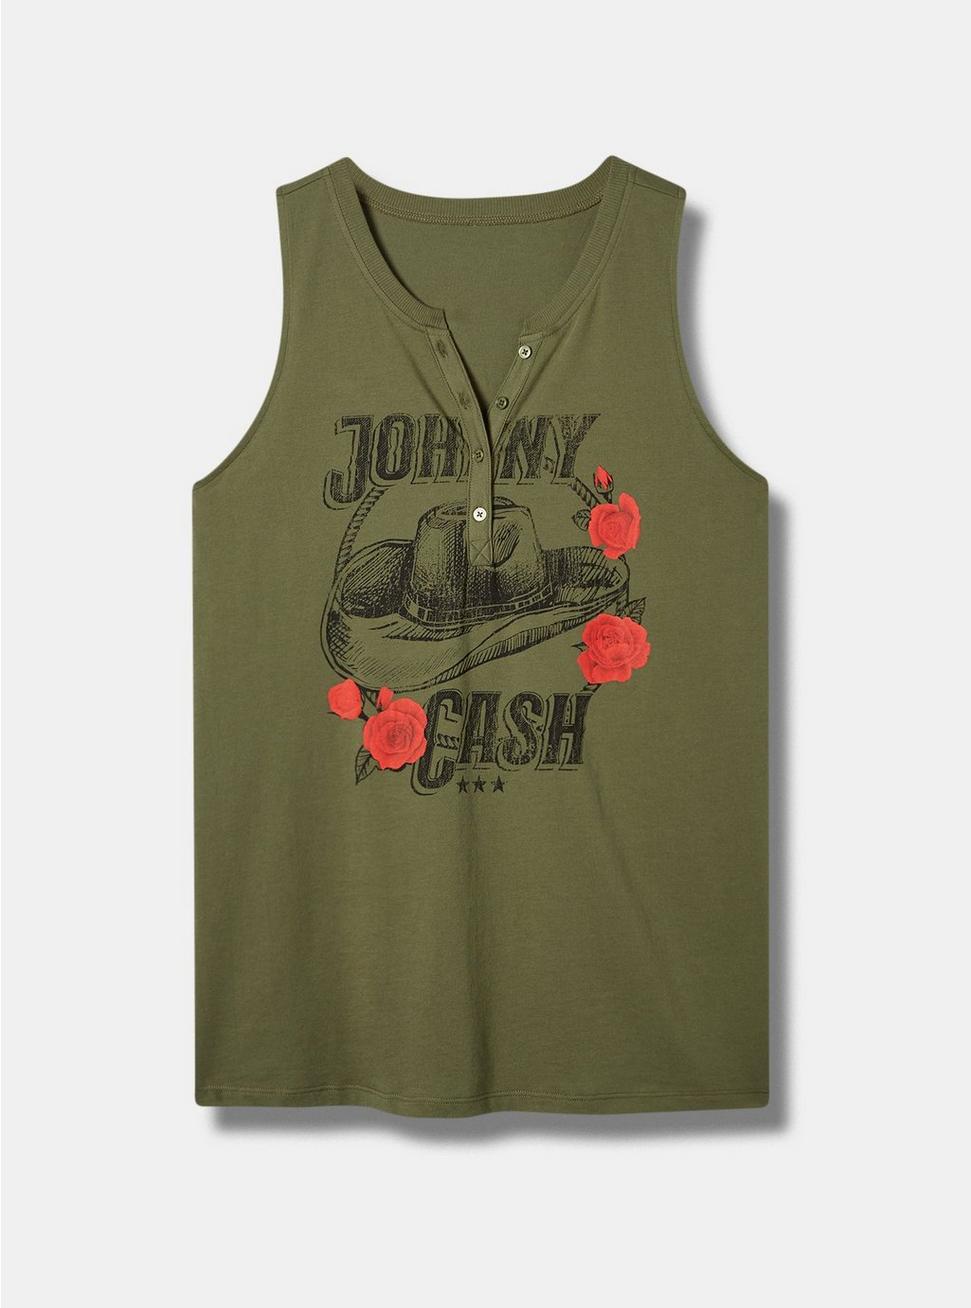 Johnny Cash Classic Fit Cotton Henley Tank, DUSTY OLIVE, hi-res